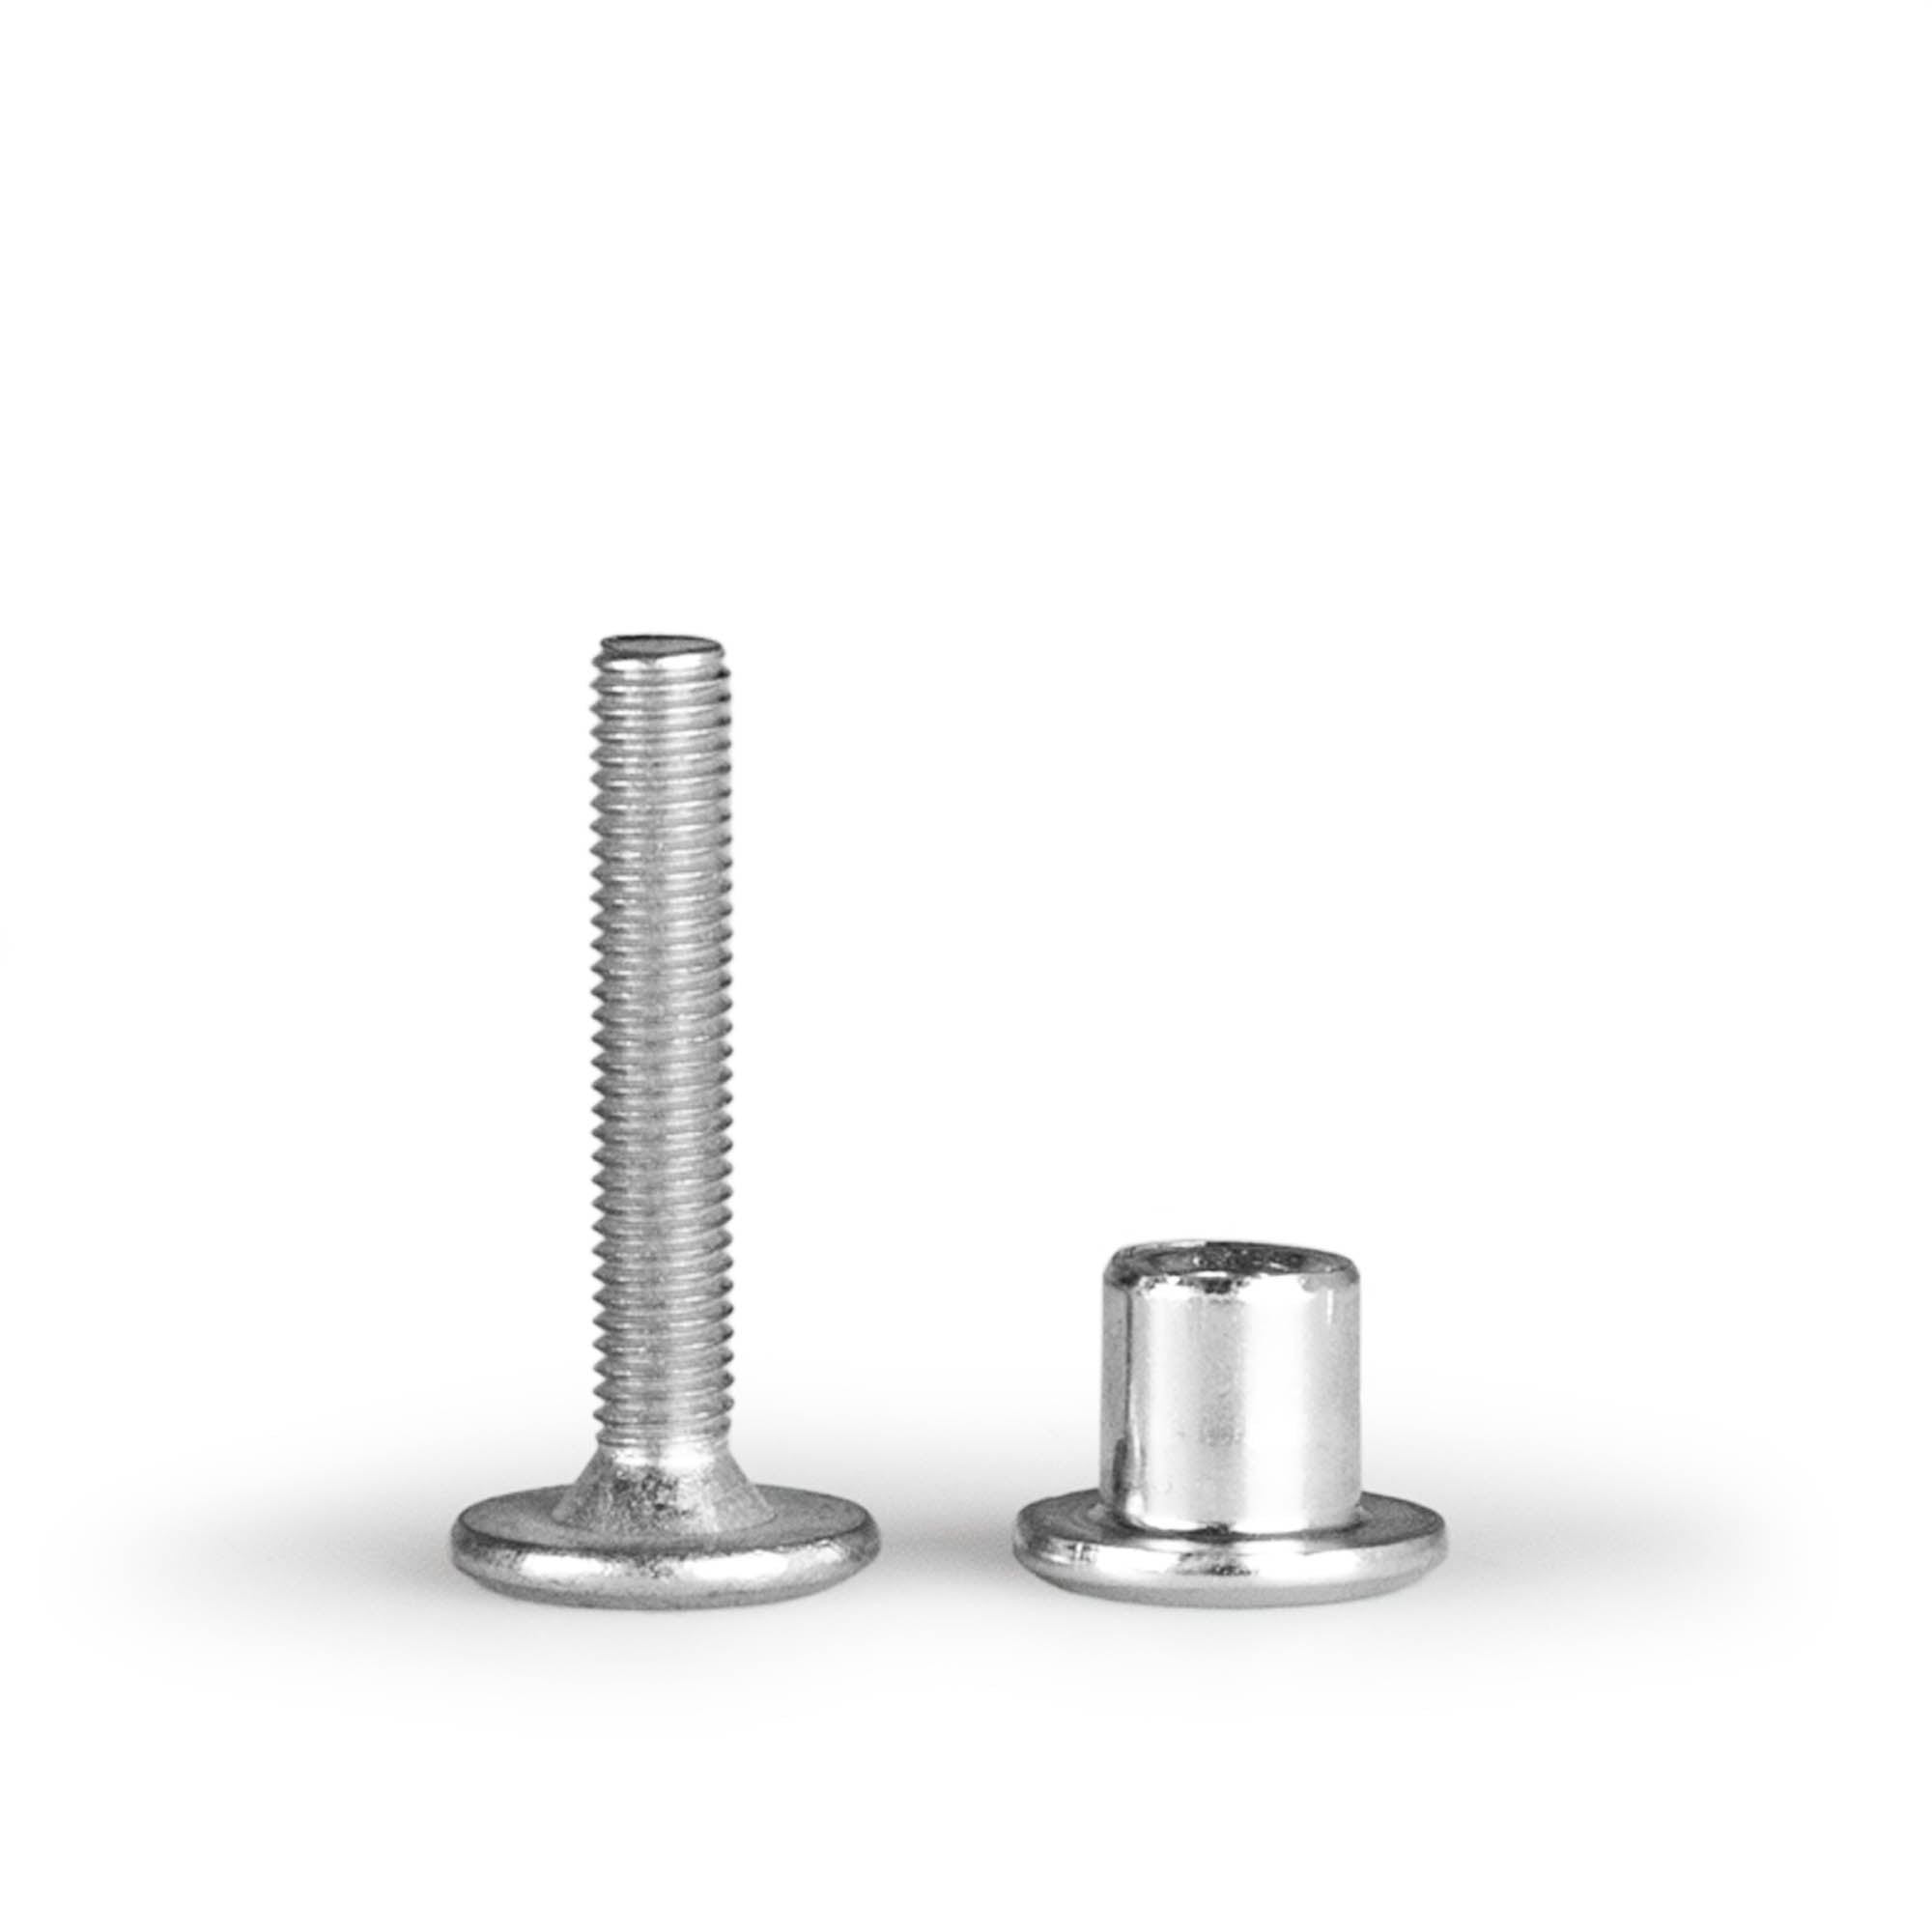 Small spare bolt and nut